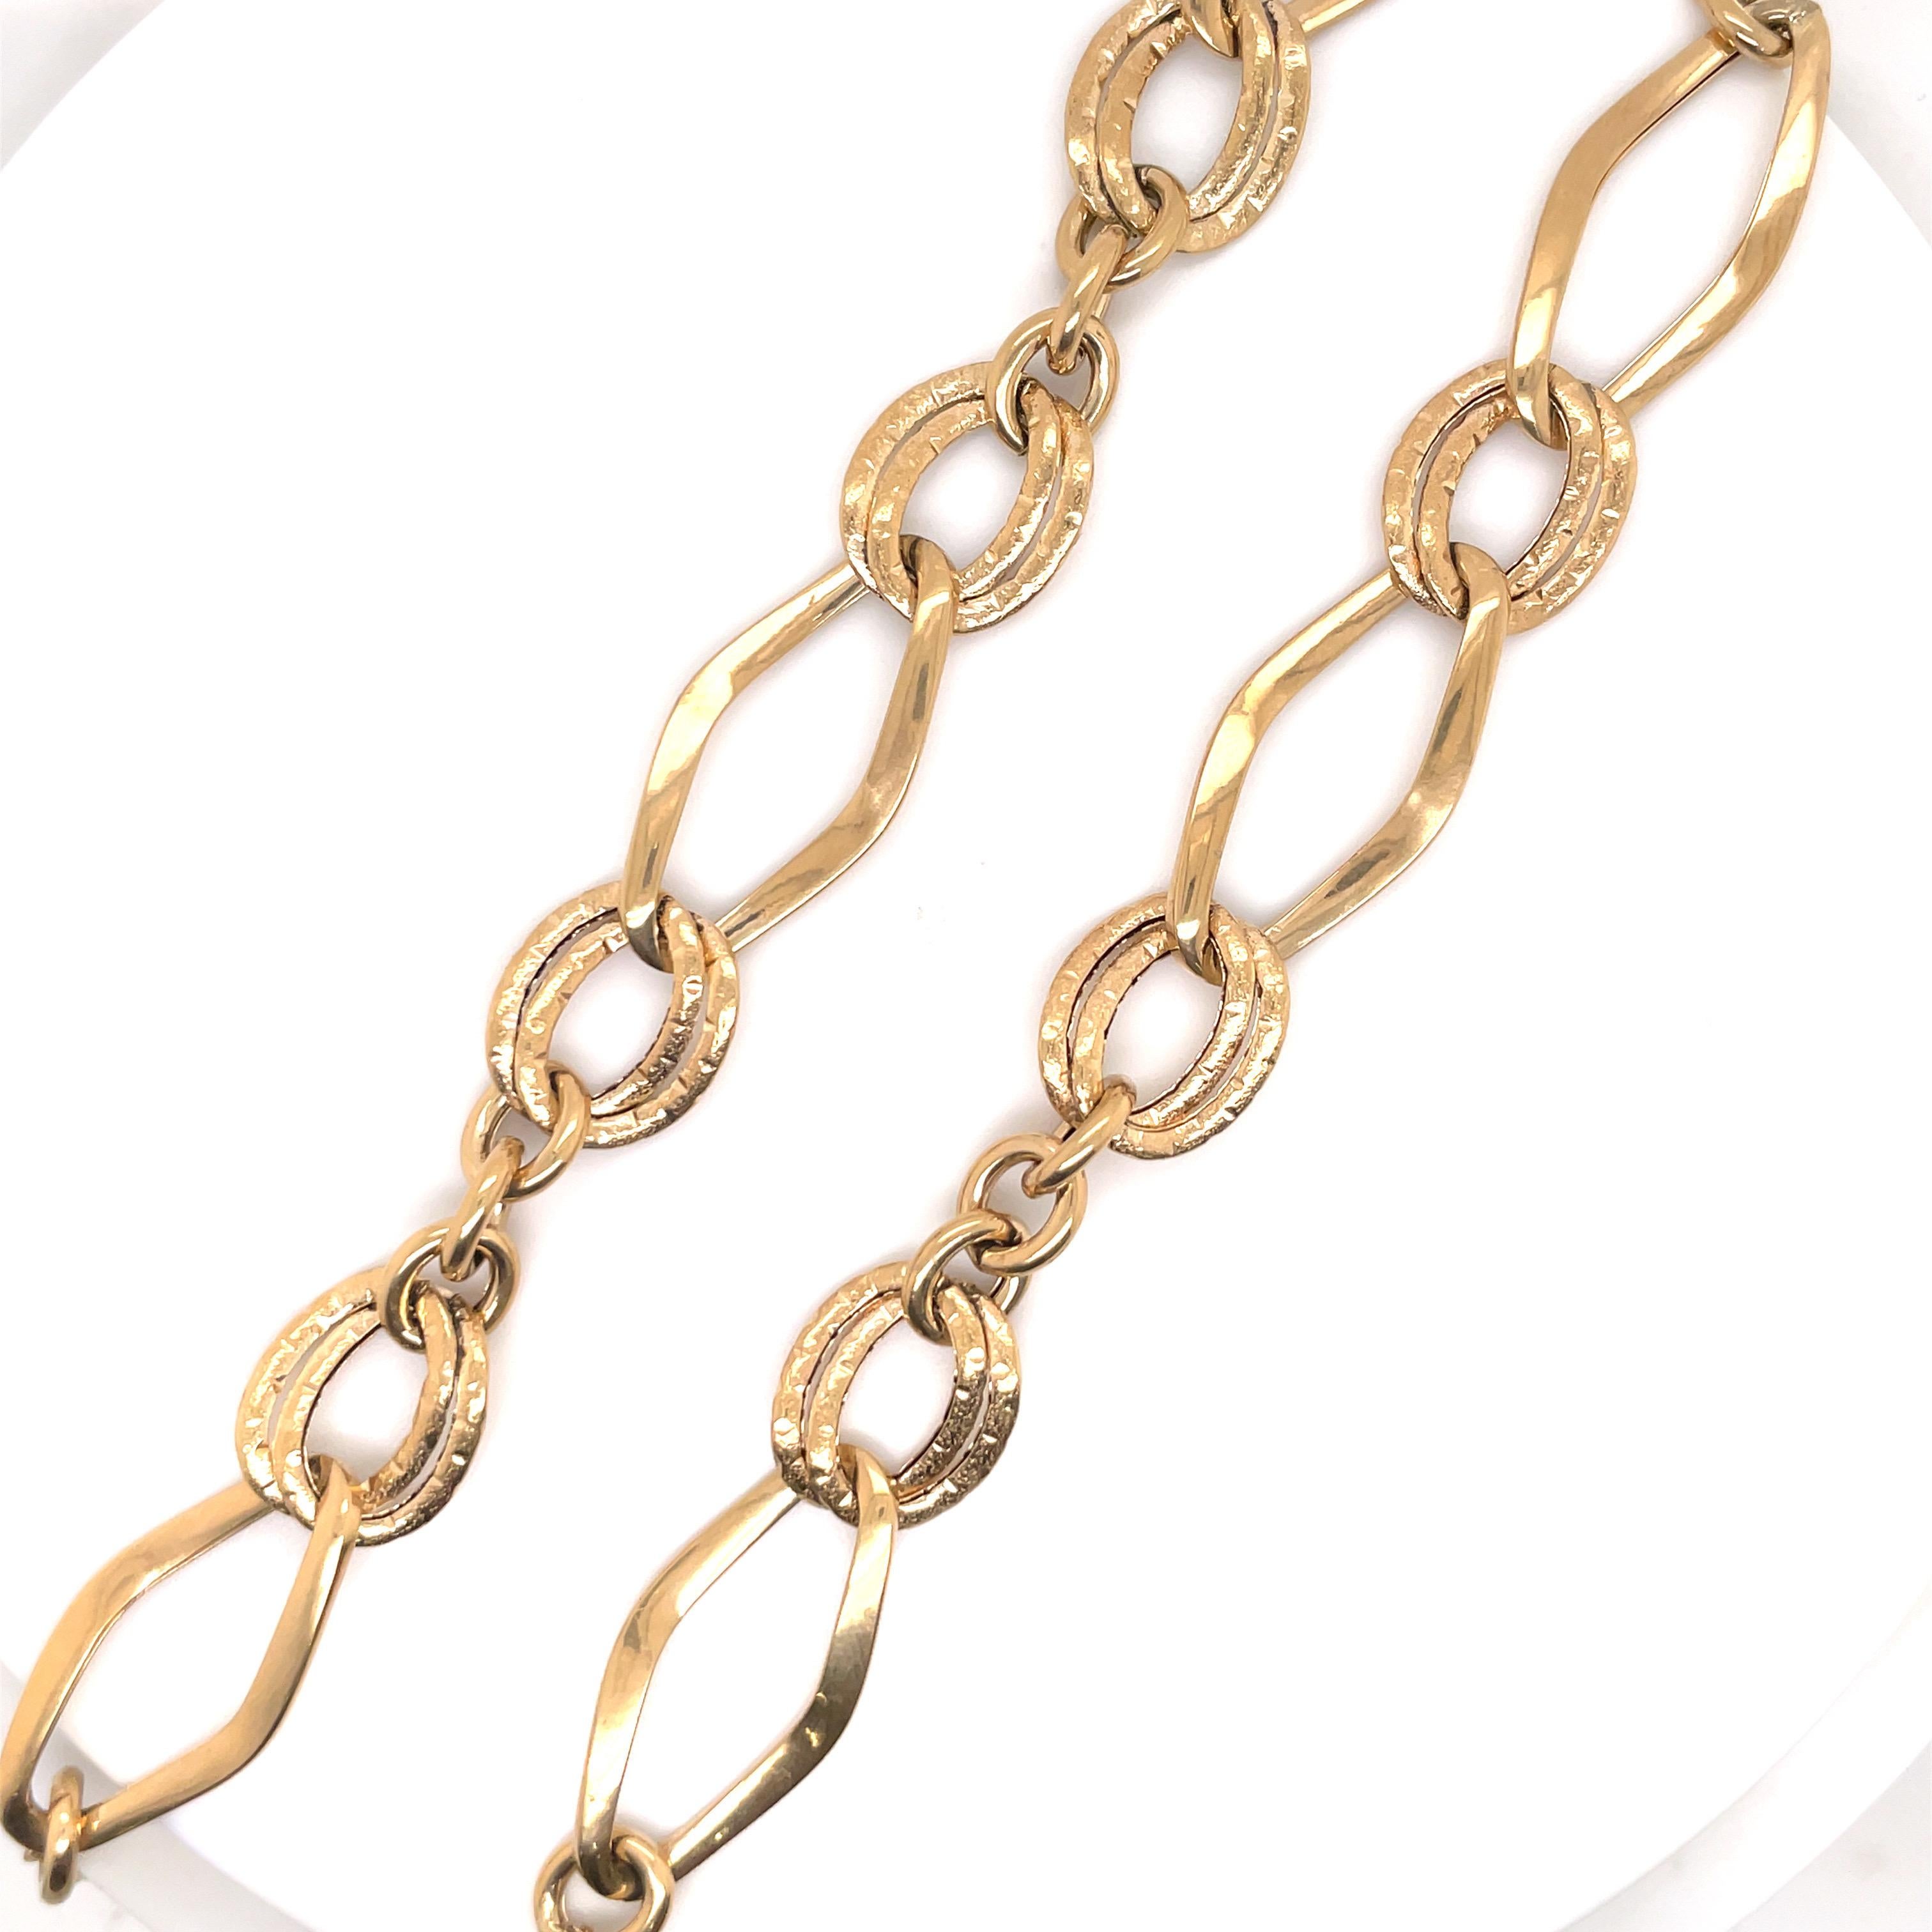 14 Karat Yellow Gold Link Necklace & Double Bracelets 30.2 Grams In Excellent Condition For Sale In New York, NY